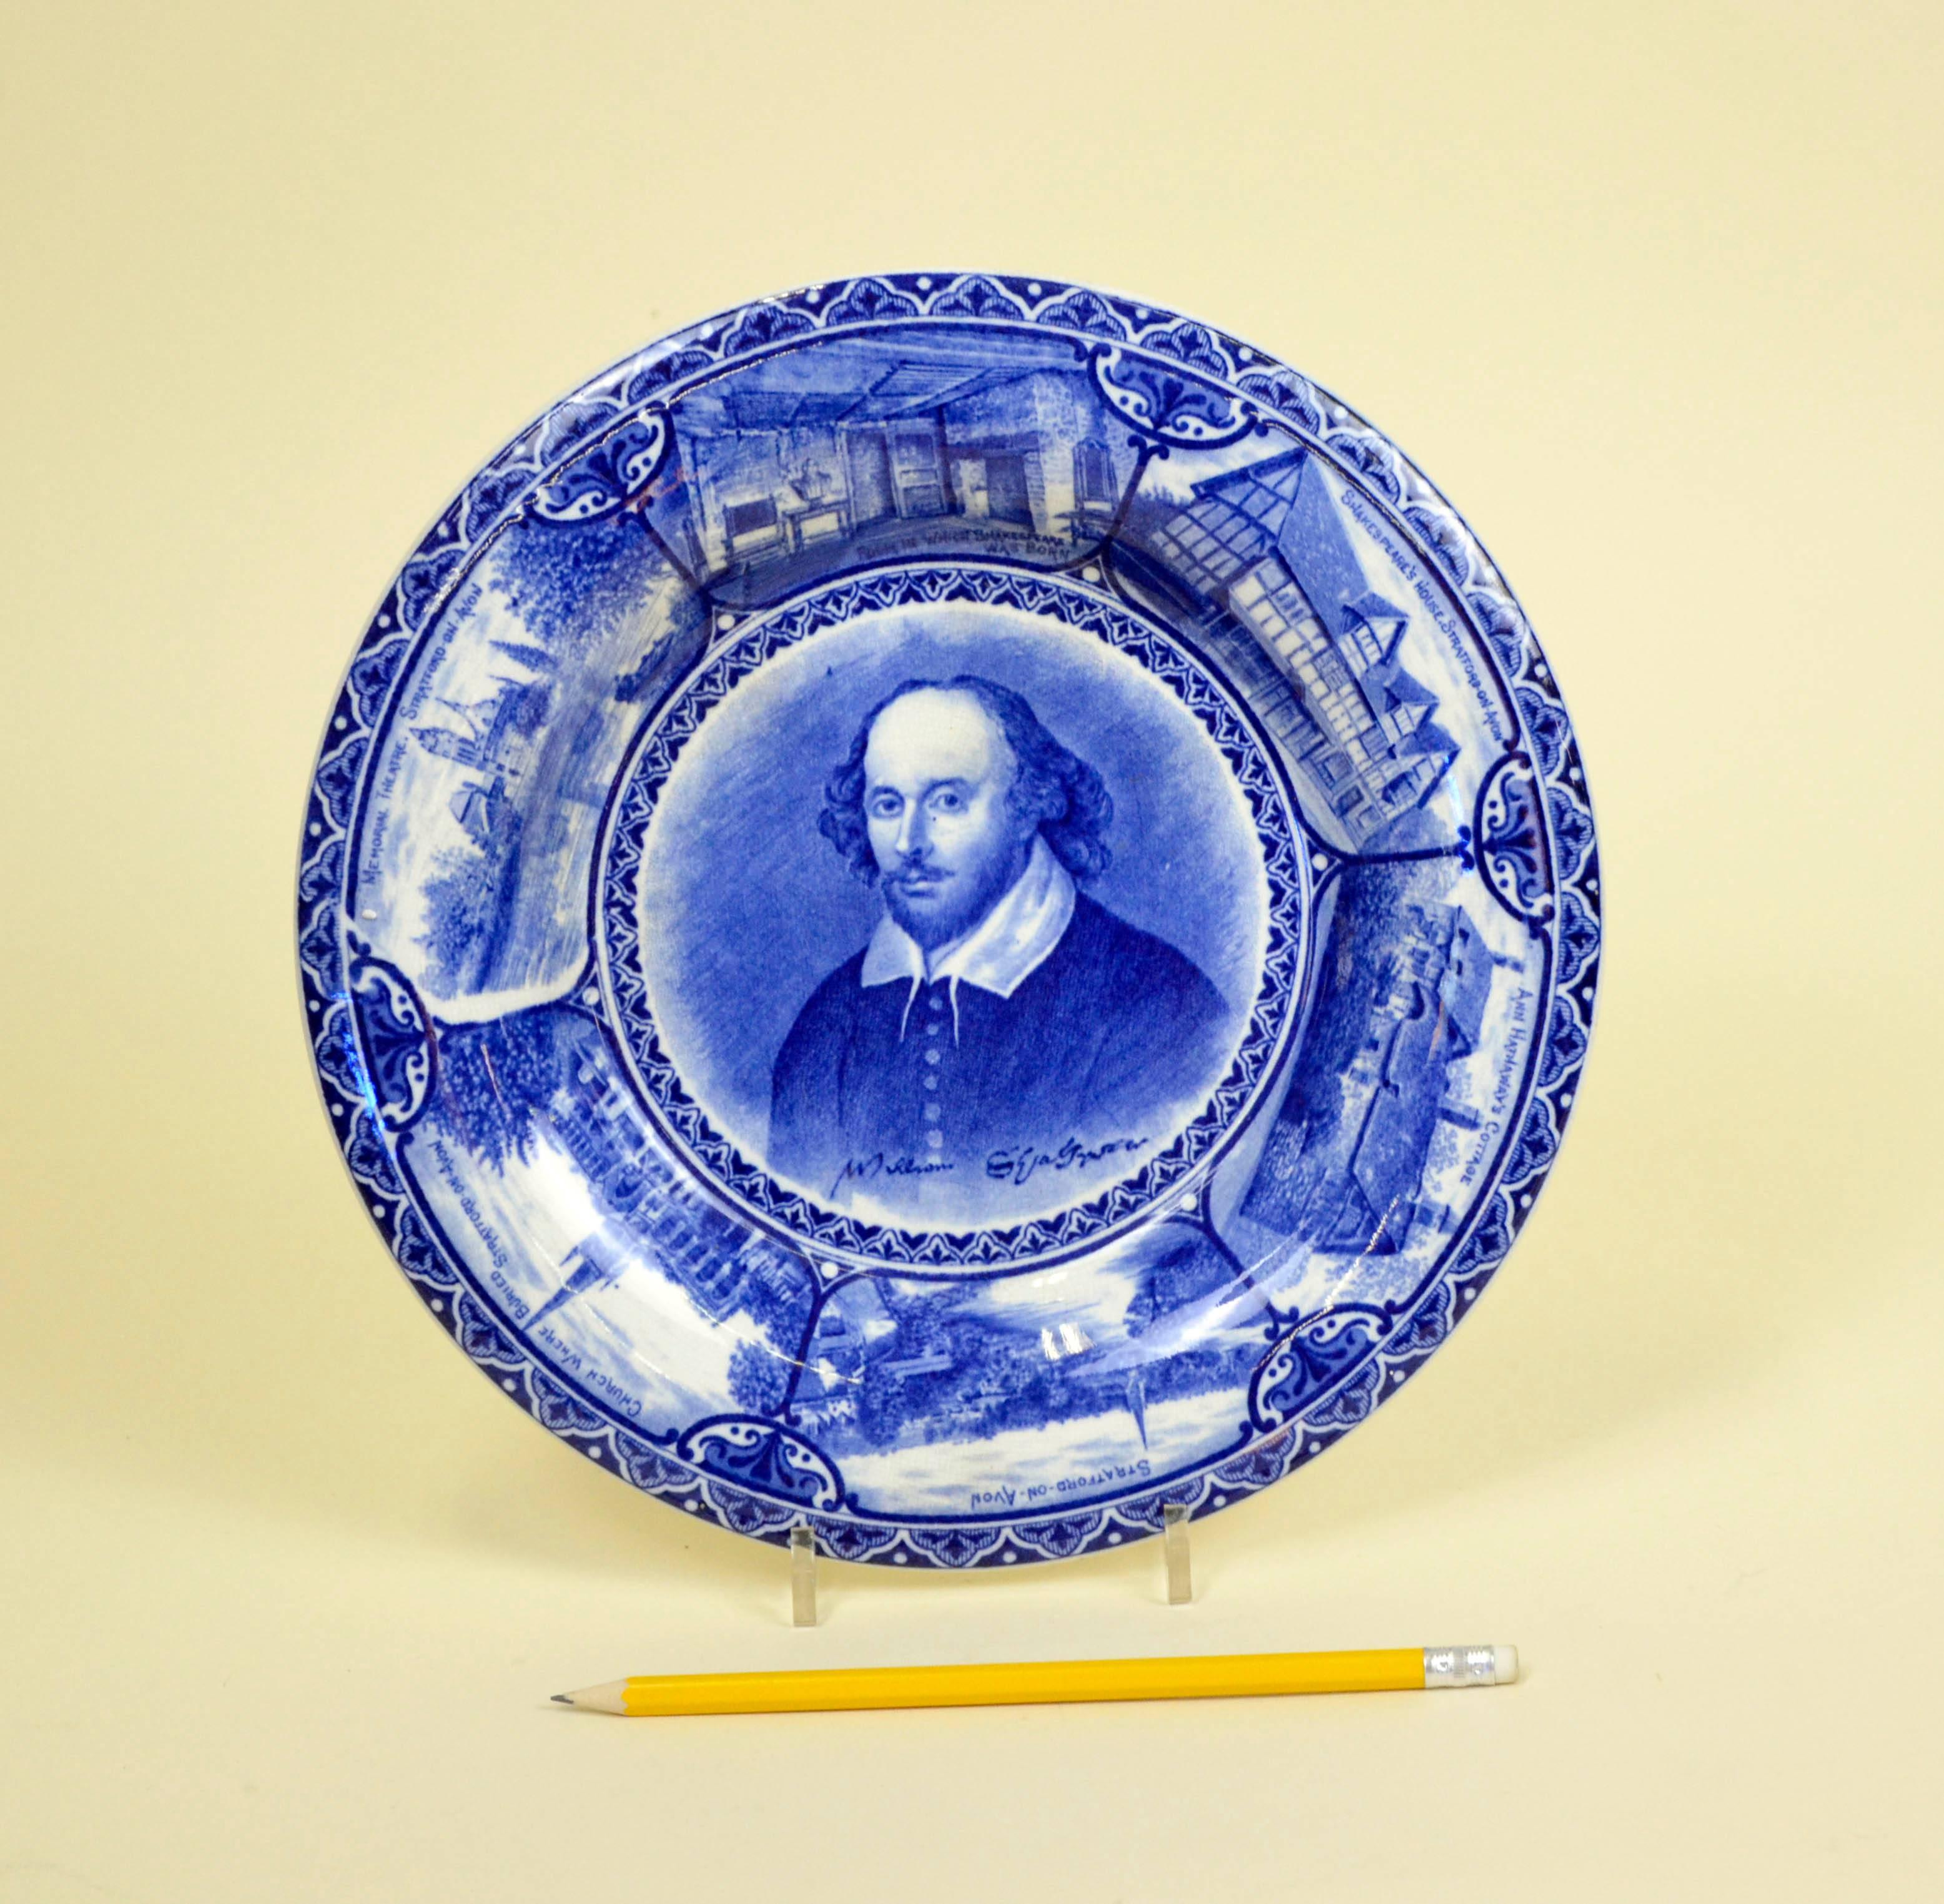 Blue and white transferware wall plate by Samuel Hancock & Sons decorated with a central portrait of William Shakespeare, the border with various associated views and his signature, circa 1904.

Printed makers marks on back: Shakespeare - Opaque